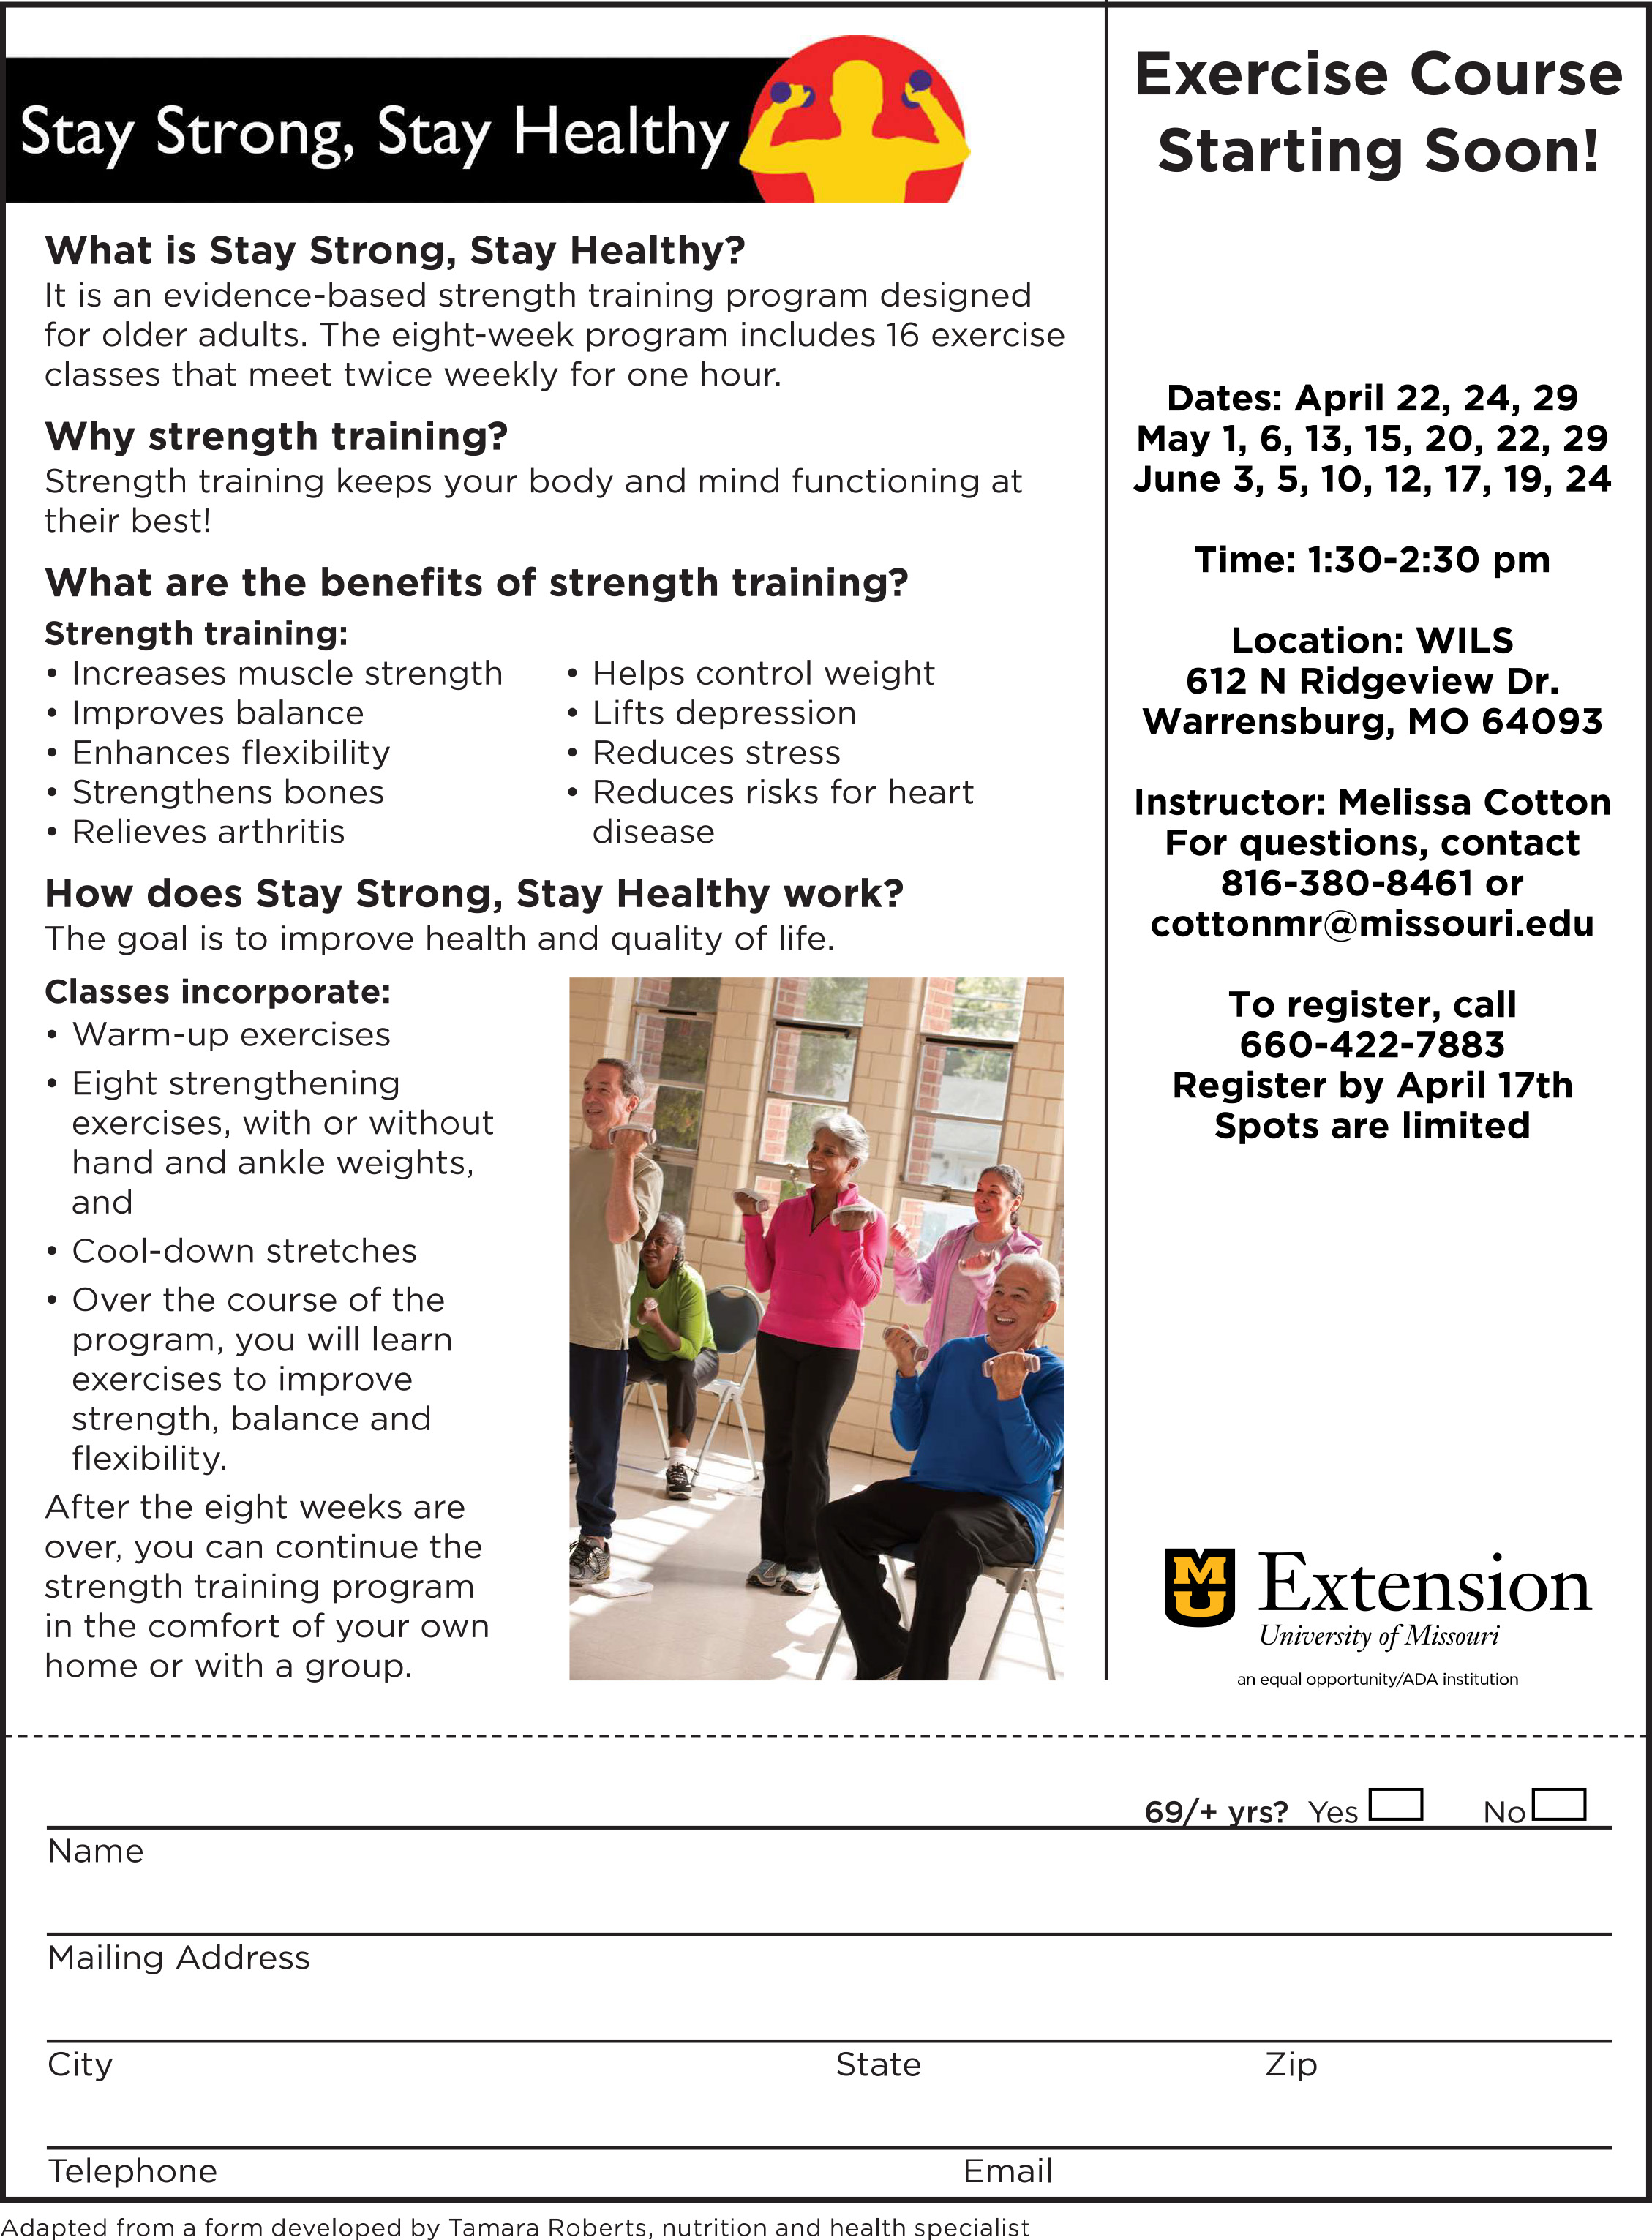 Stay Strong, Stay Healthy Exercise Class @ WILS Warrensburg Office